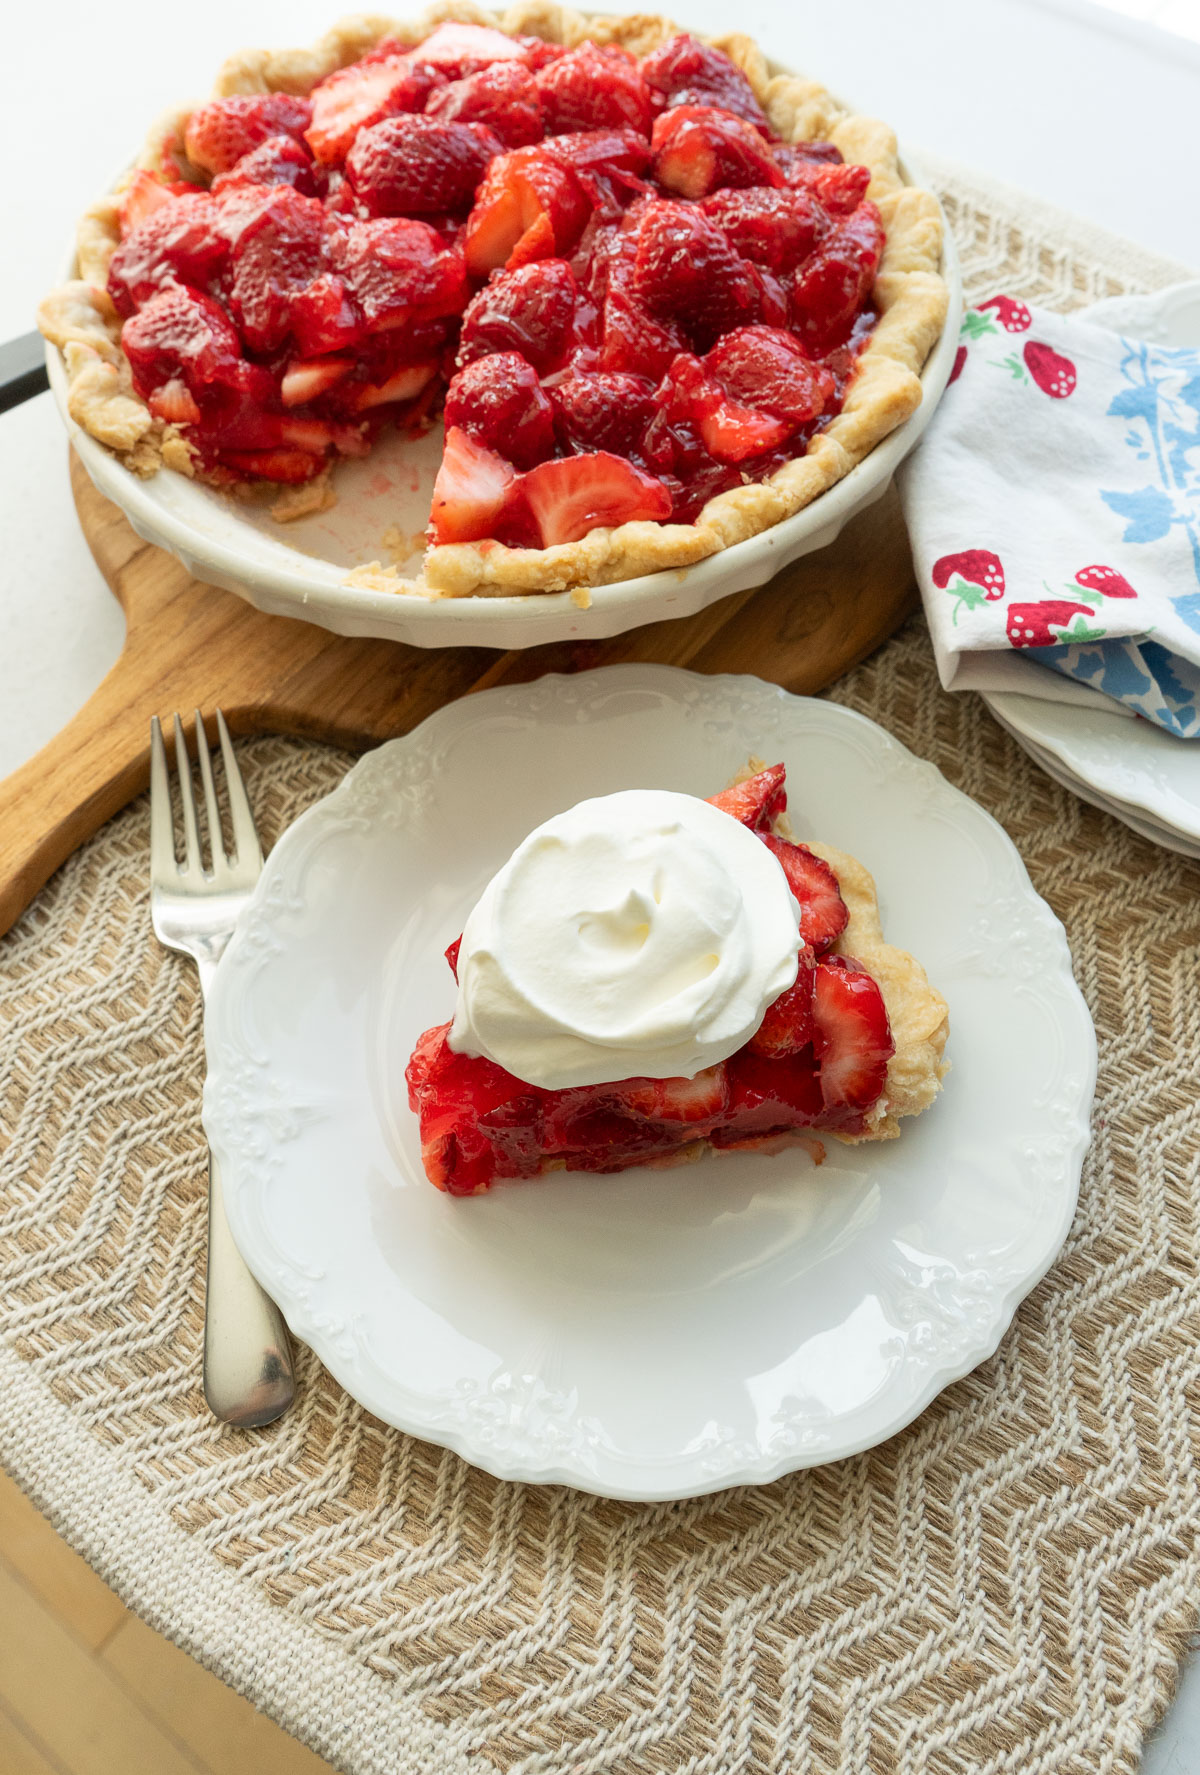 Strawberry pie white plate with a piece of strawberrry pie on it with a fork on the left side